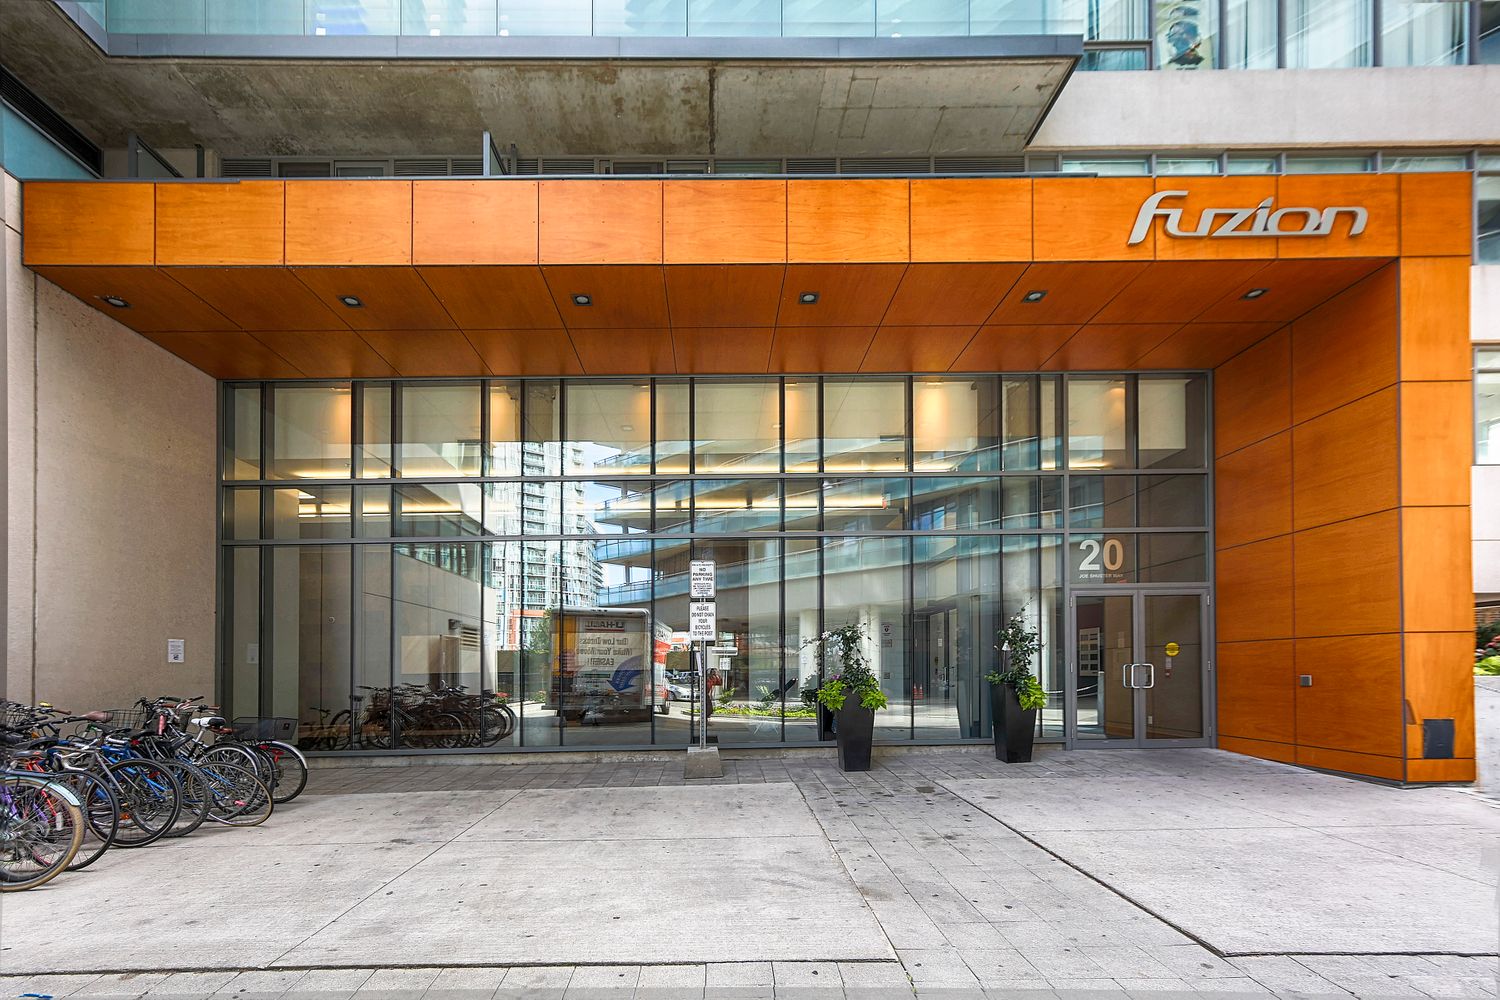 20 Joe Shuster Way. Fuzion is located in  West End, Toronto - image #4 of 5